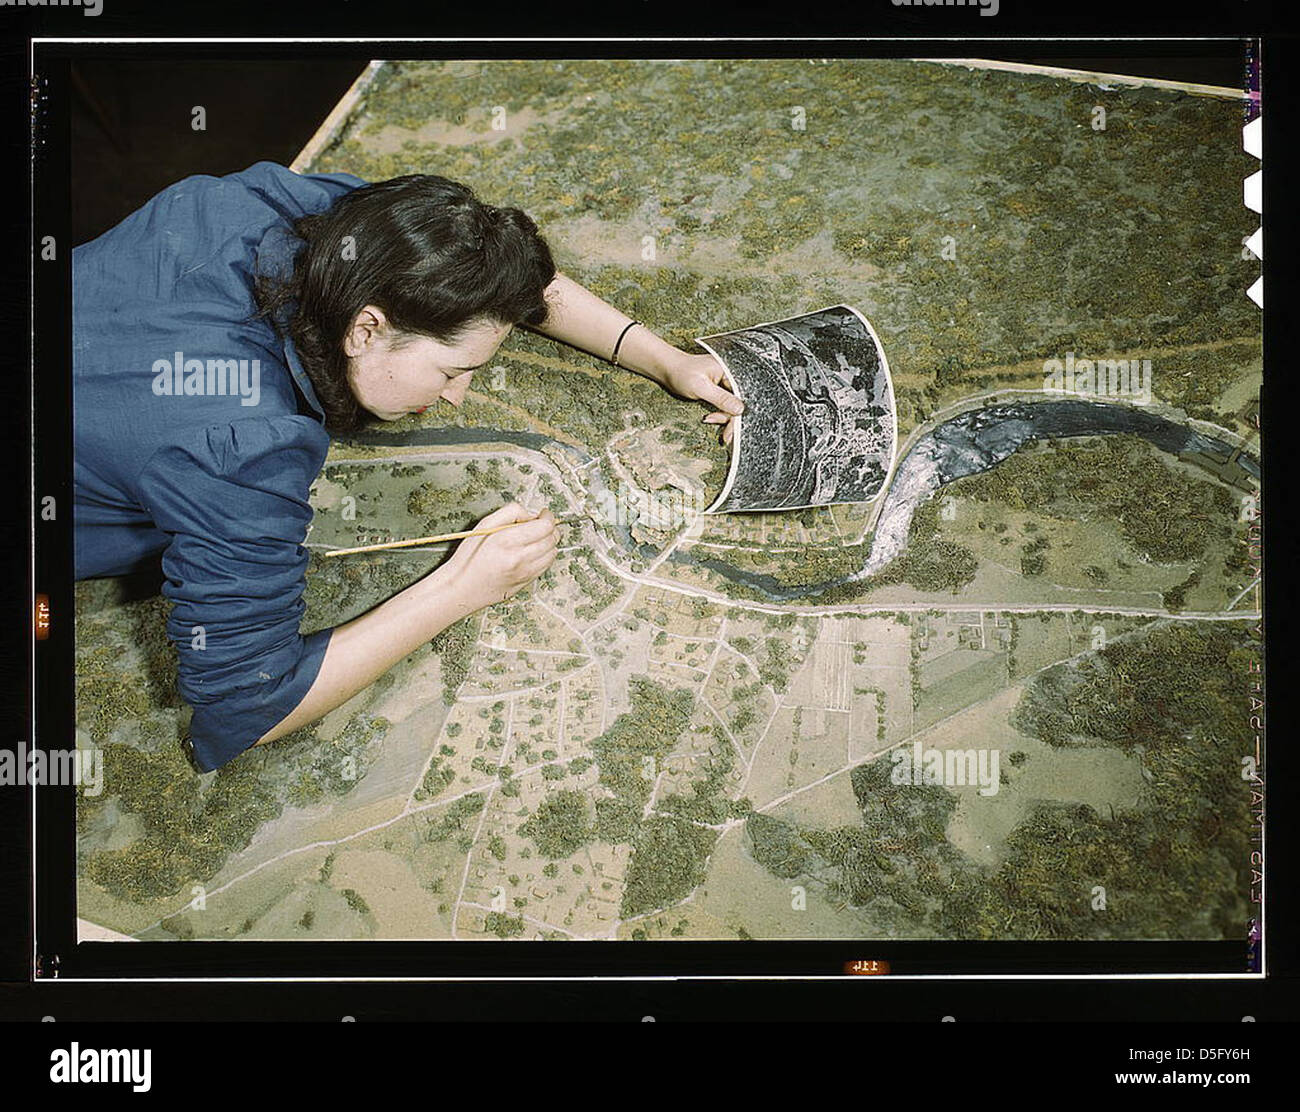 Camouflage class at N[ew] Y[ork] University, where men and women are preparing for jobs in the Army or in industry, New York, N.Y. This model has been camouflaged and photographed. The girl is correcting oversights detected in the camouflaging of a model Stock Photo